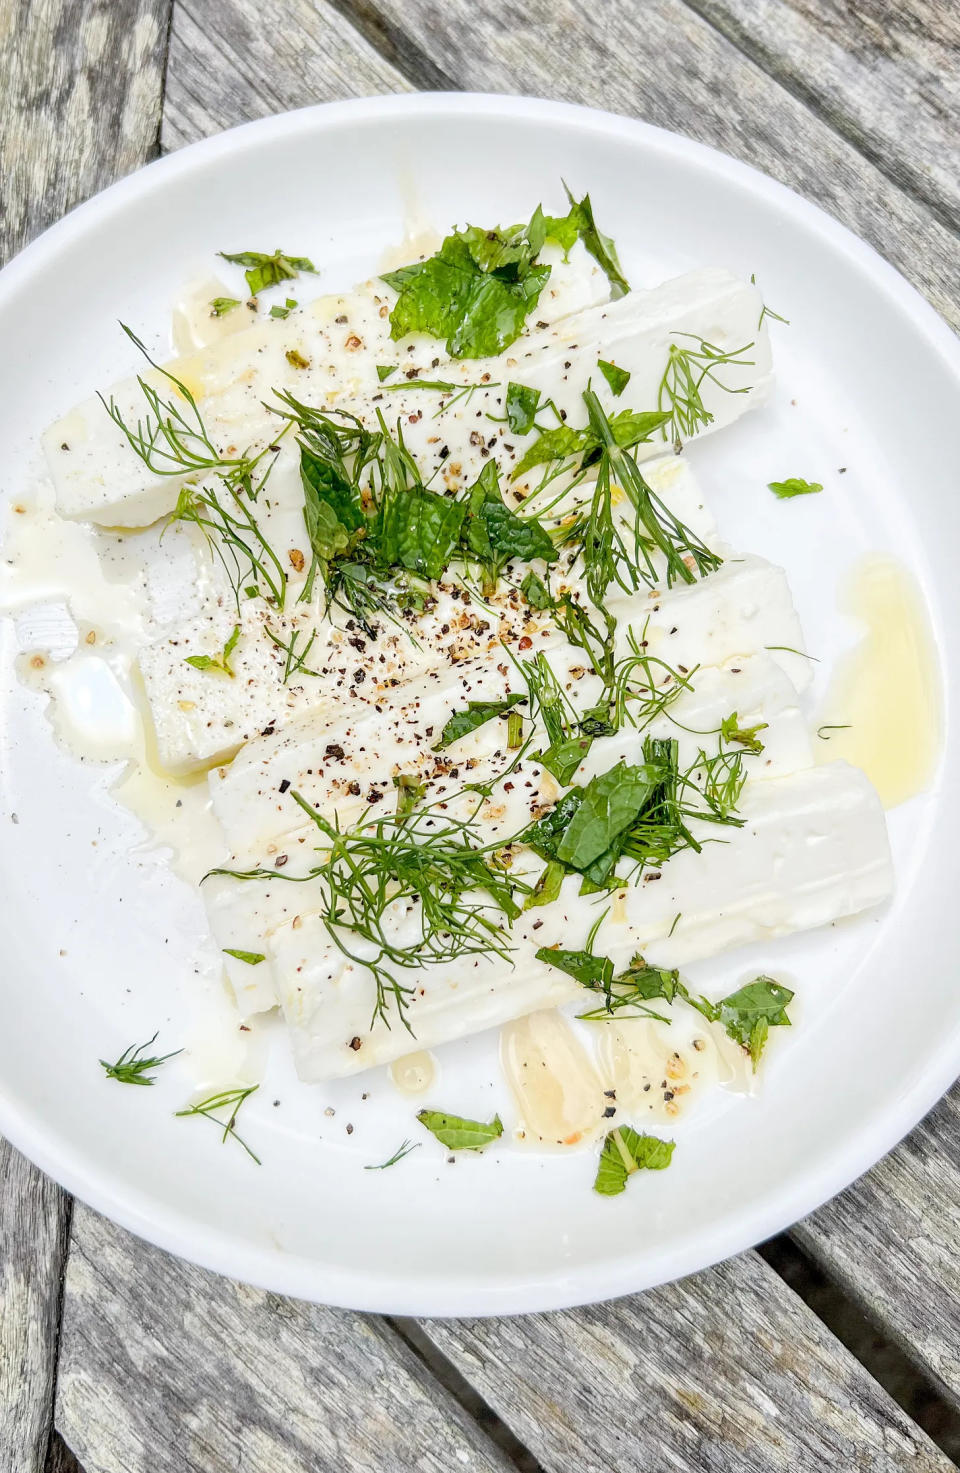 A drizzle of extra-virgin olive oil and honey with a sprinkle of chopped herbs make this feta dish earn its 